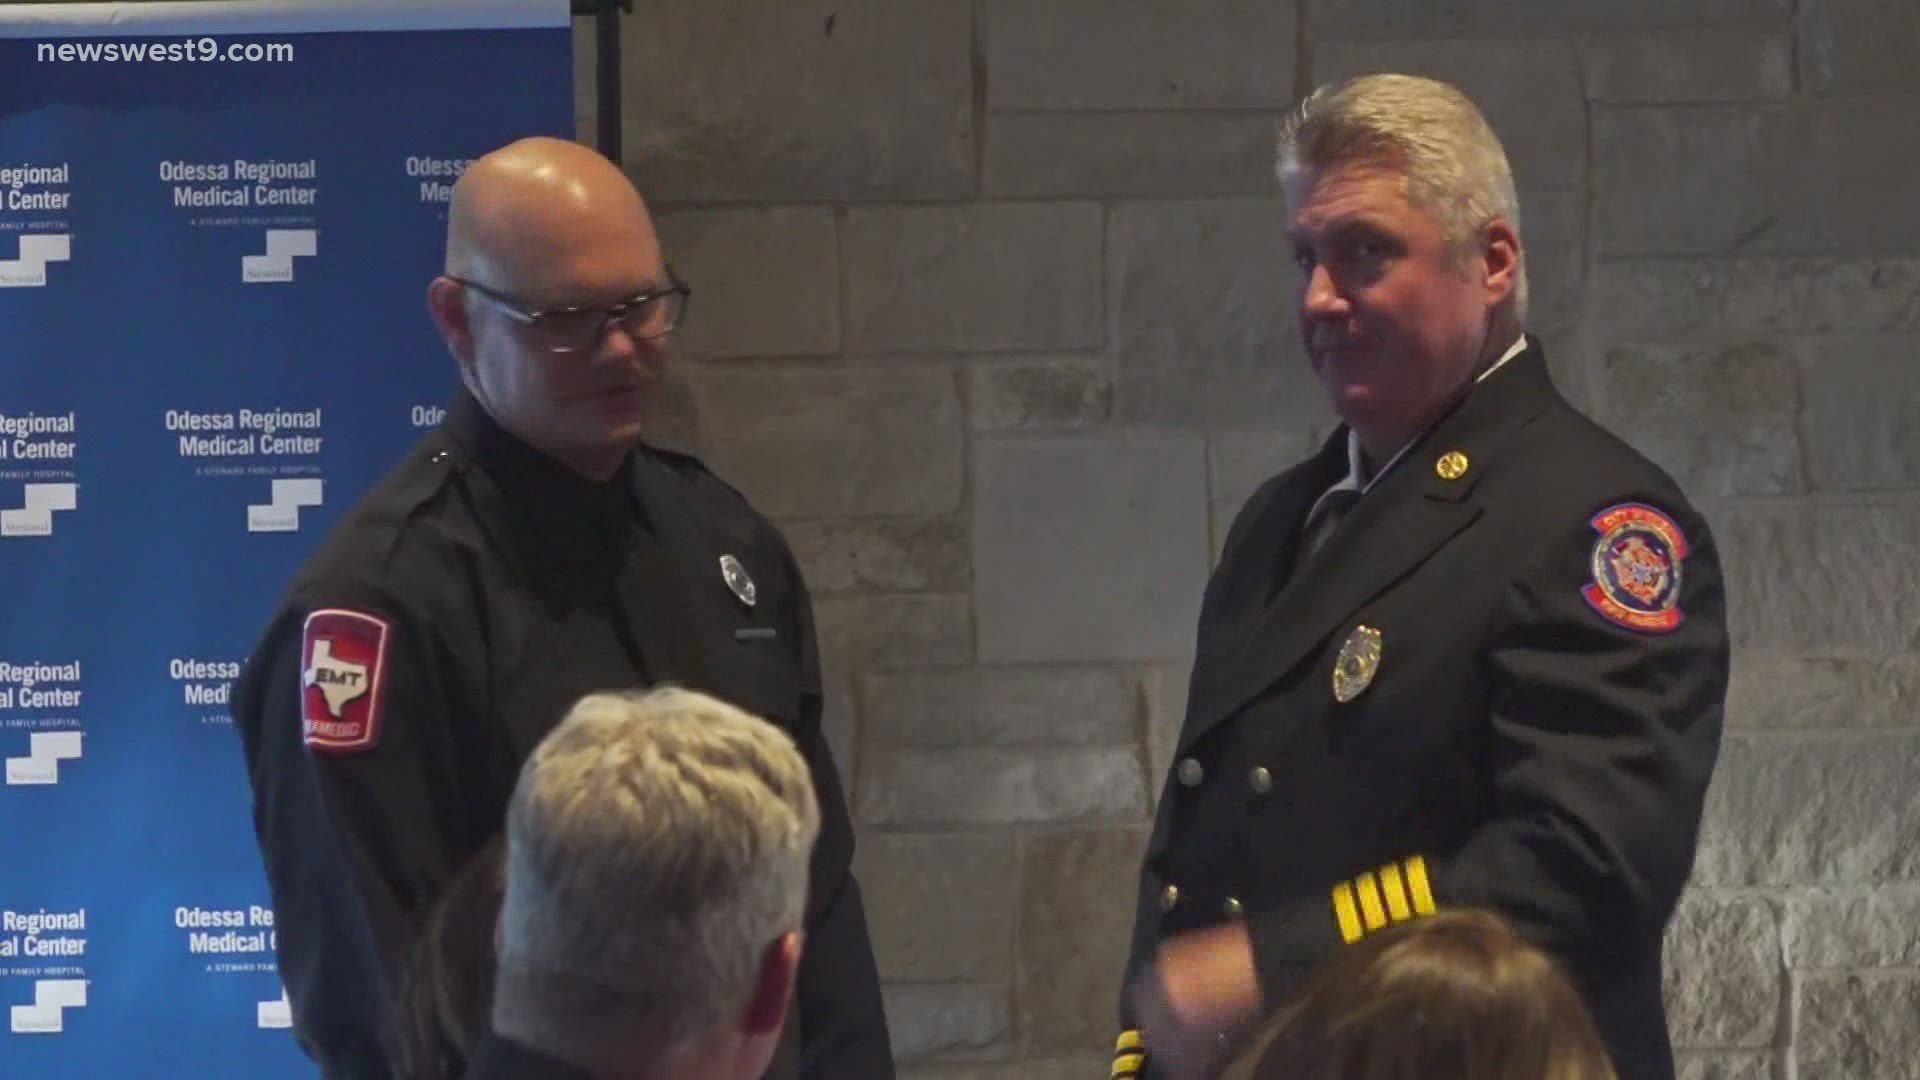 The EMS Service Awards recognize providers whose hard work and compassion make them leaders in their field.